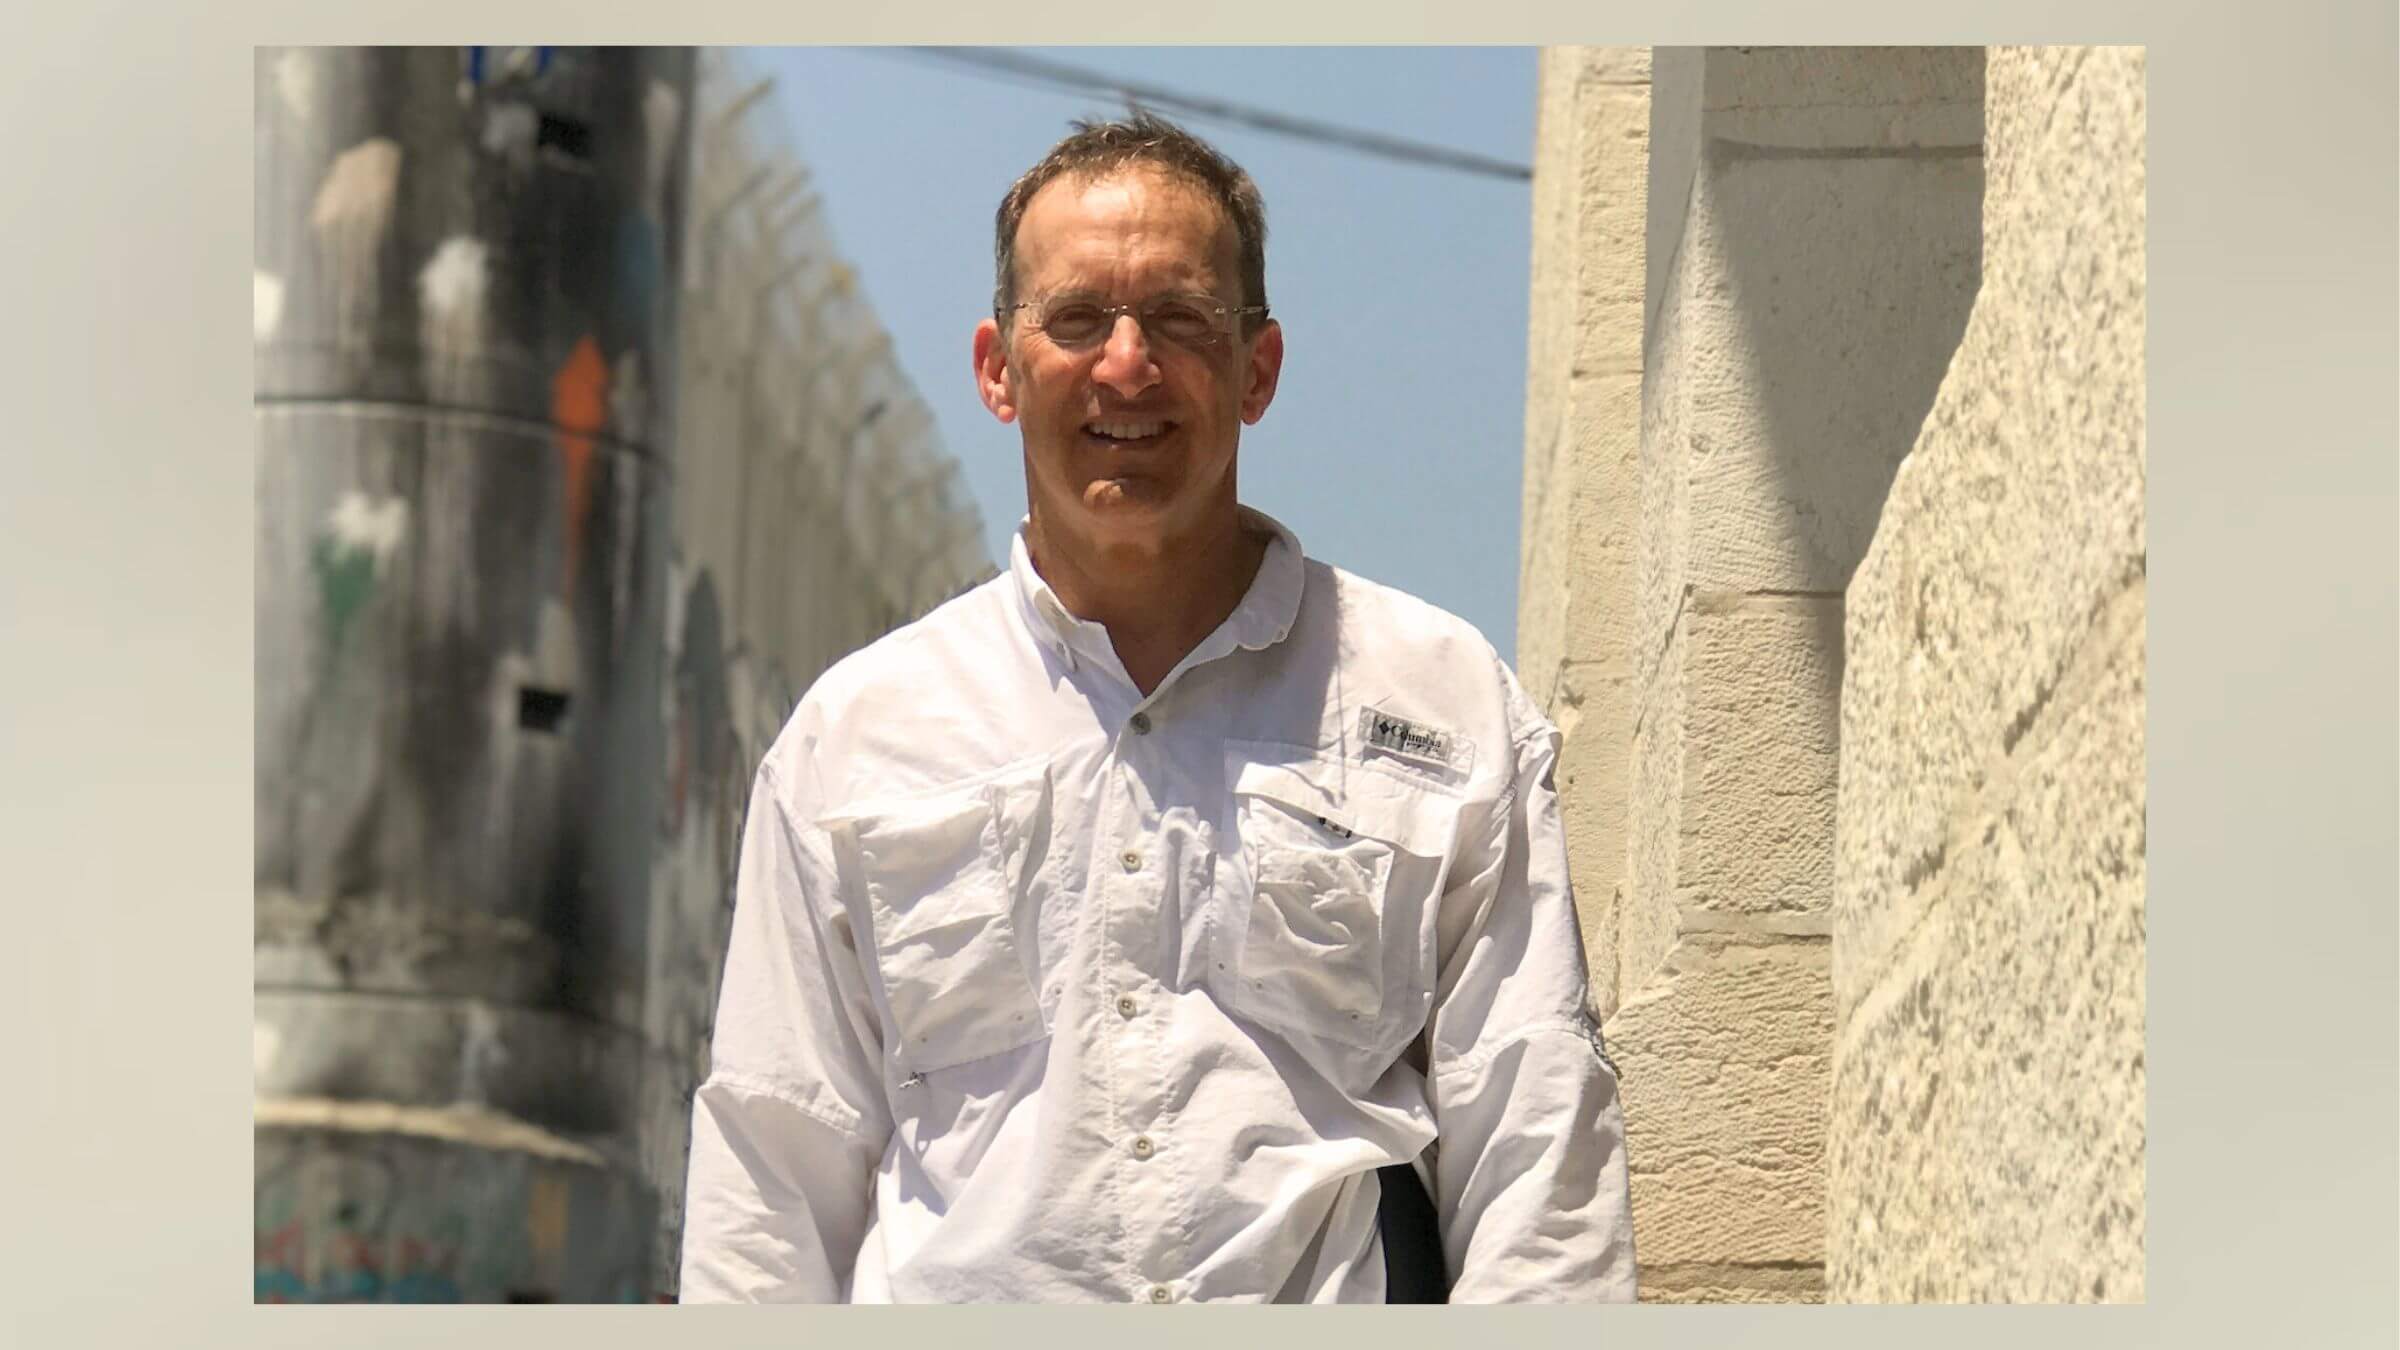 Dr. Steve Feldman, pictured on a trip to the West Bank. Feldman was denied payment from the state of Arkansas for refusing to sign a pledge promising not to boycott Israel. (Courtesy of Steve Feldman)